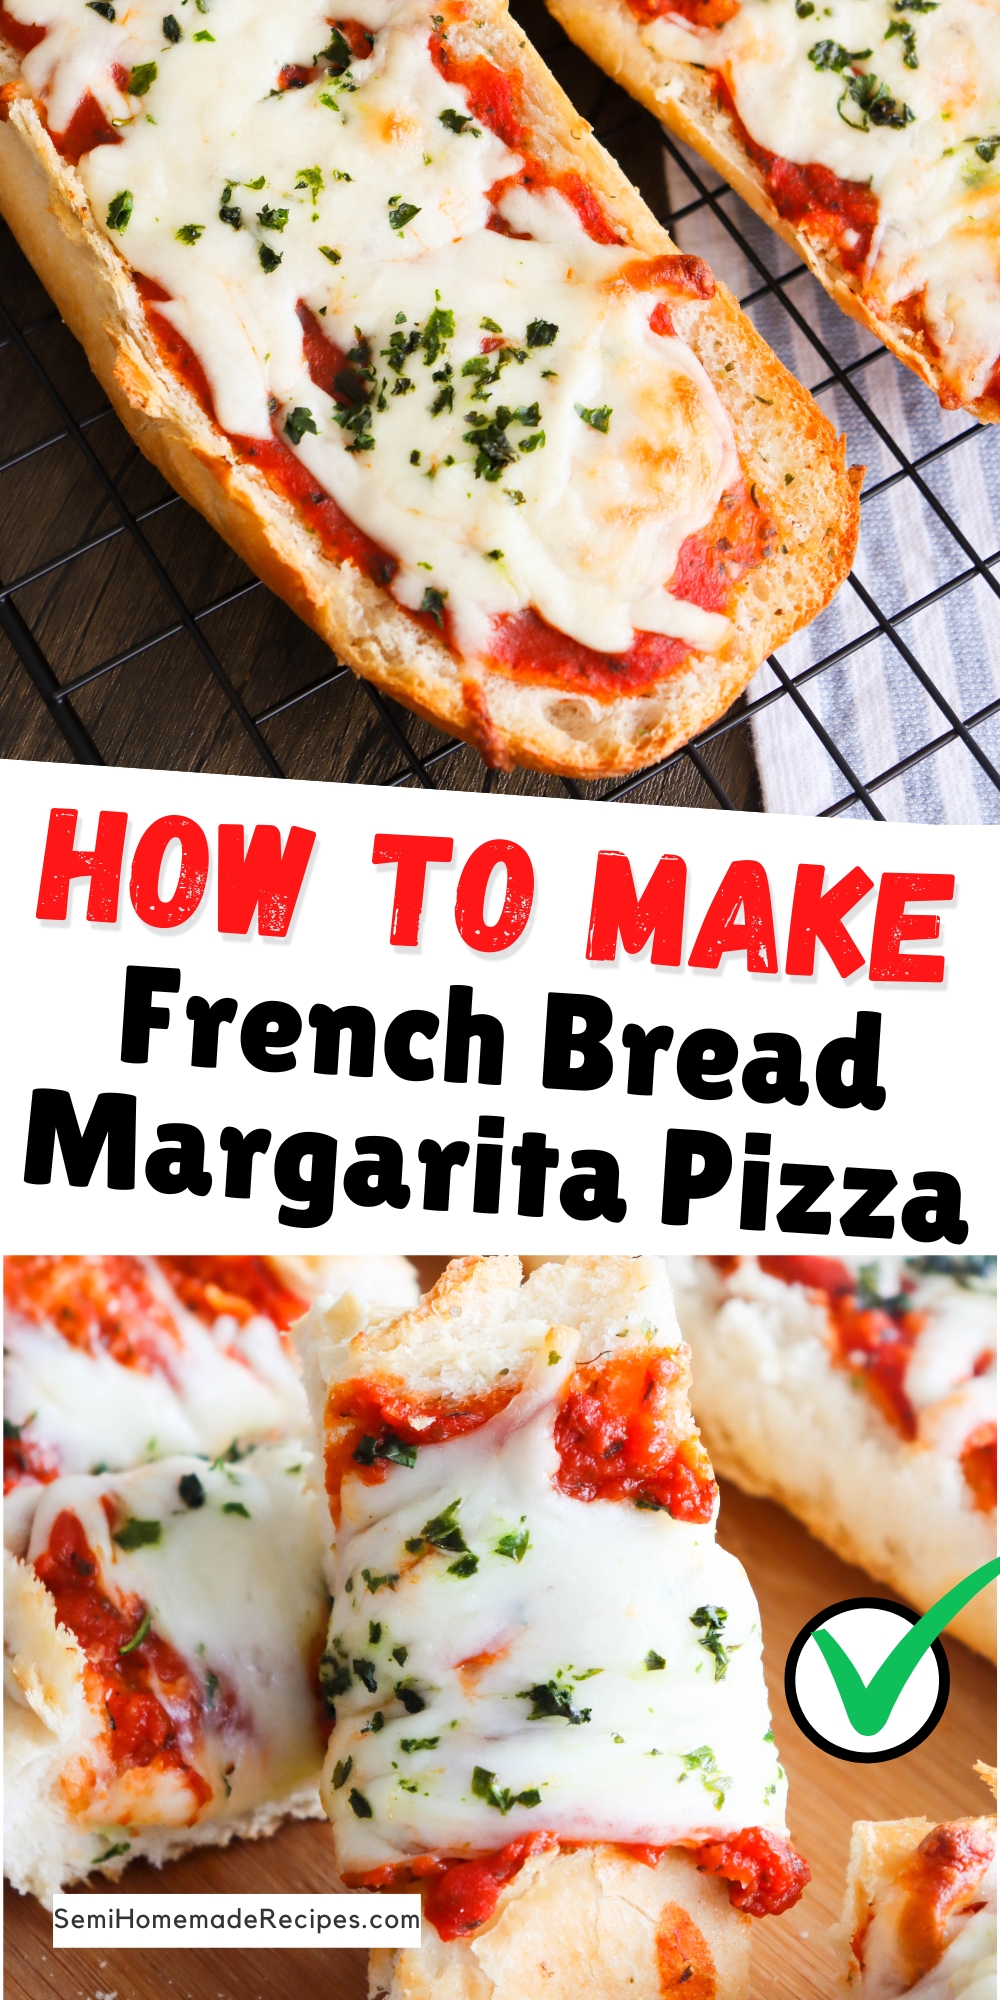 Are you tired of the same old pizza? Switch it up with French Bread Margarita Pizza! This fun semi-homemade twist on a classic dish uses French bread (or Italian bread) instead of traditional pizza dough. You'll love how easy this recipe is and how fun it is to make with kids!